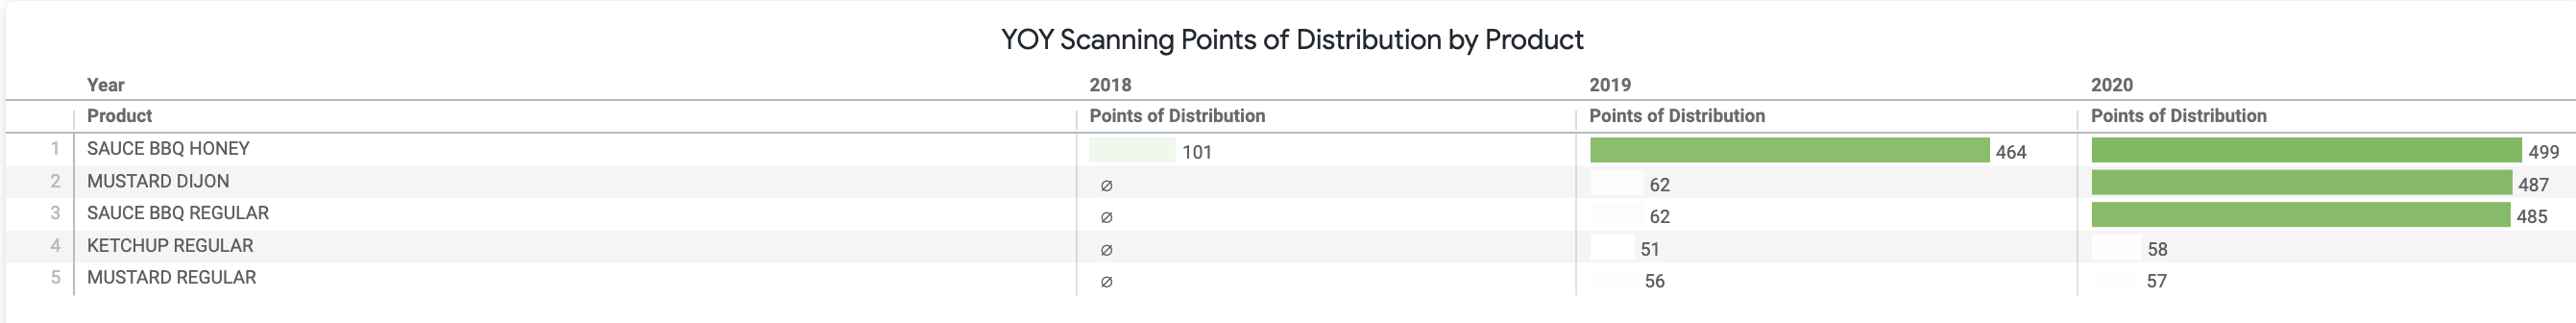 YOY_Scanning_Points_of_Distribution_by_Product.png